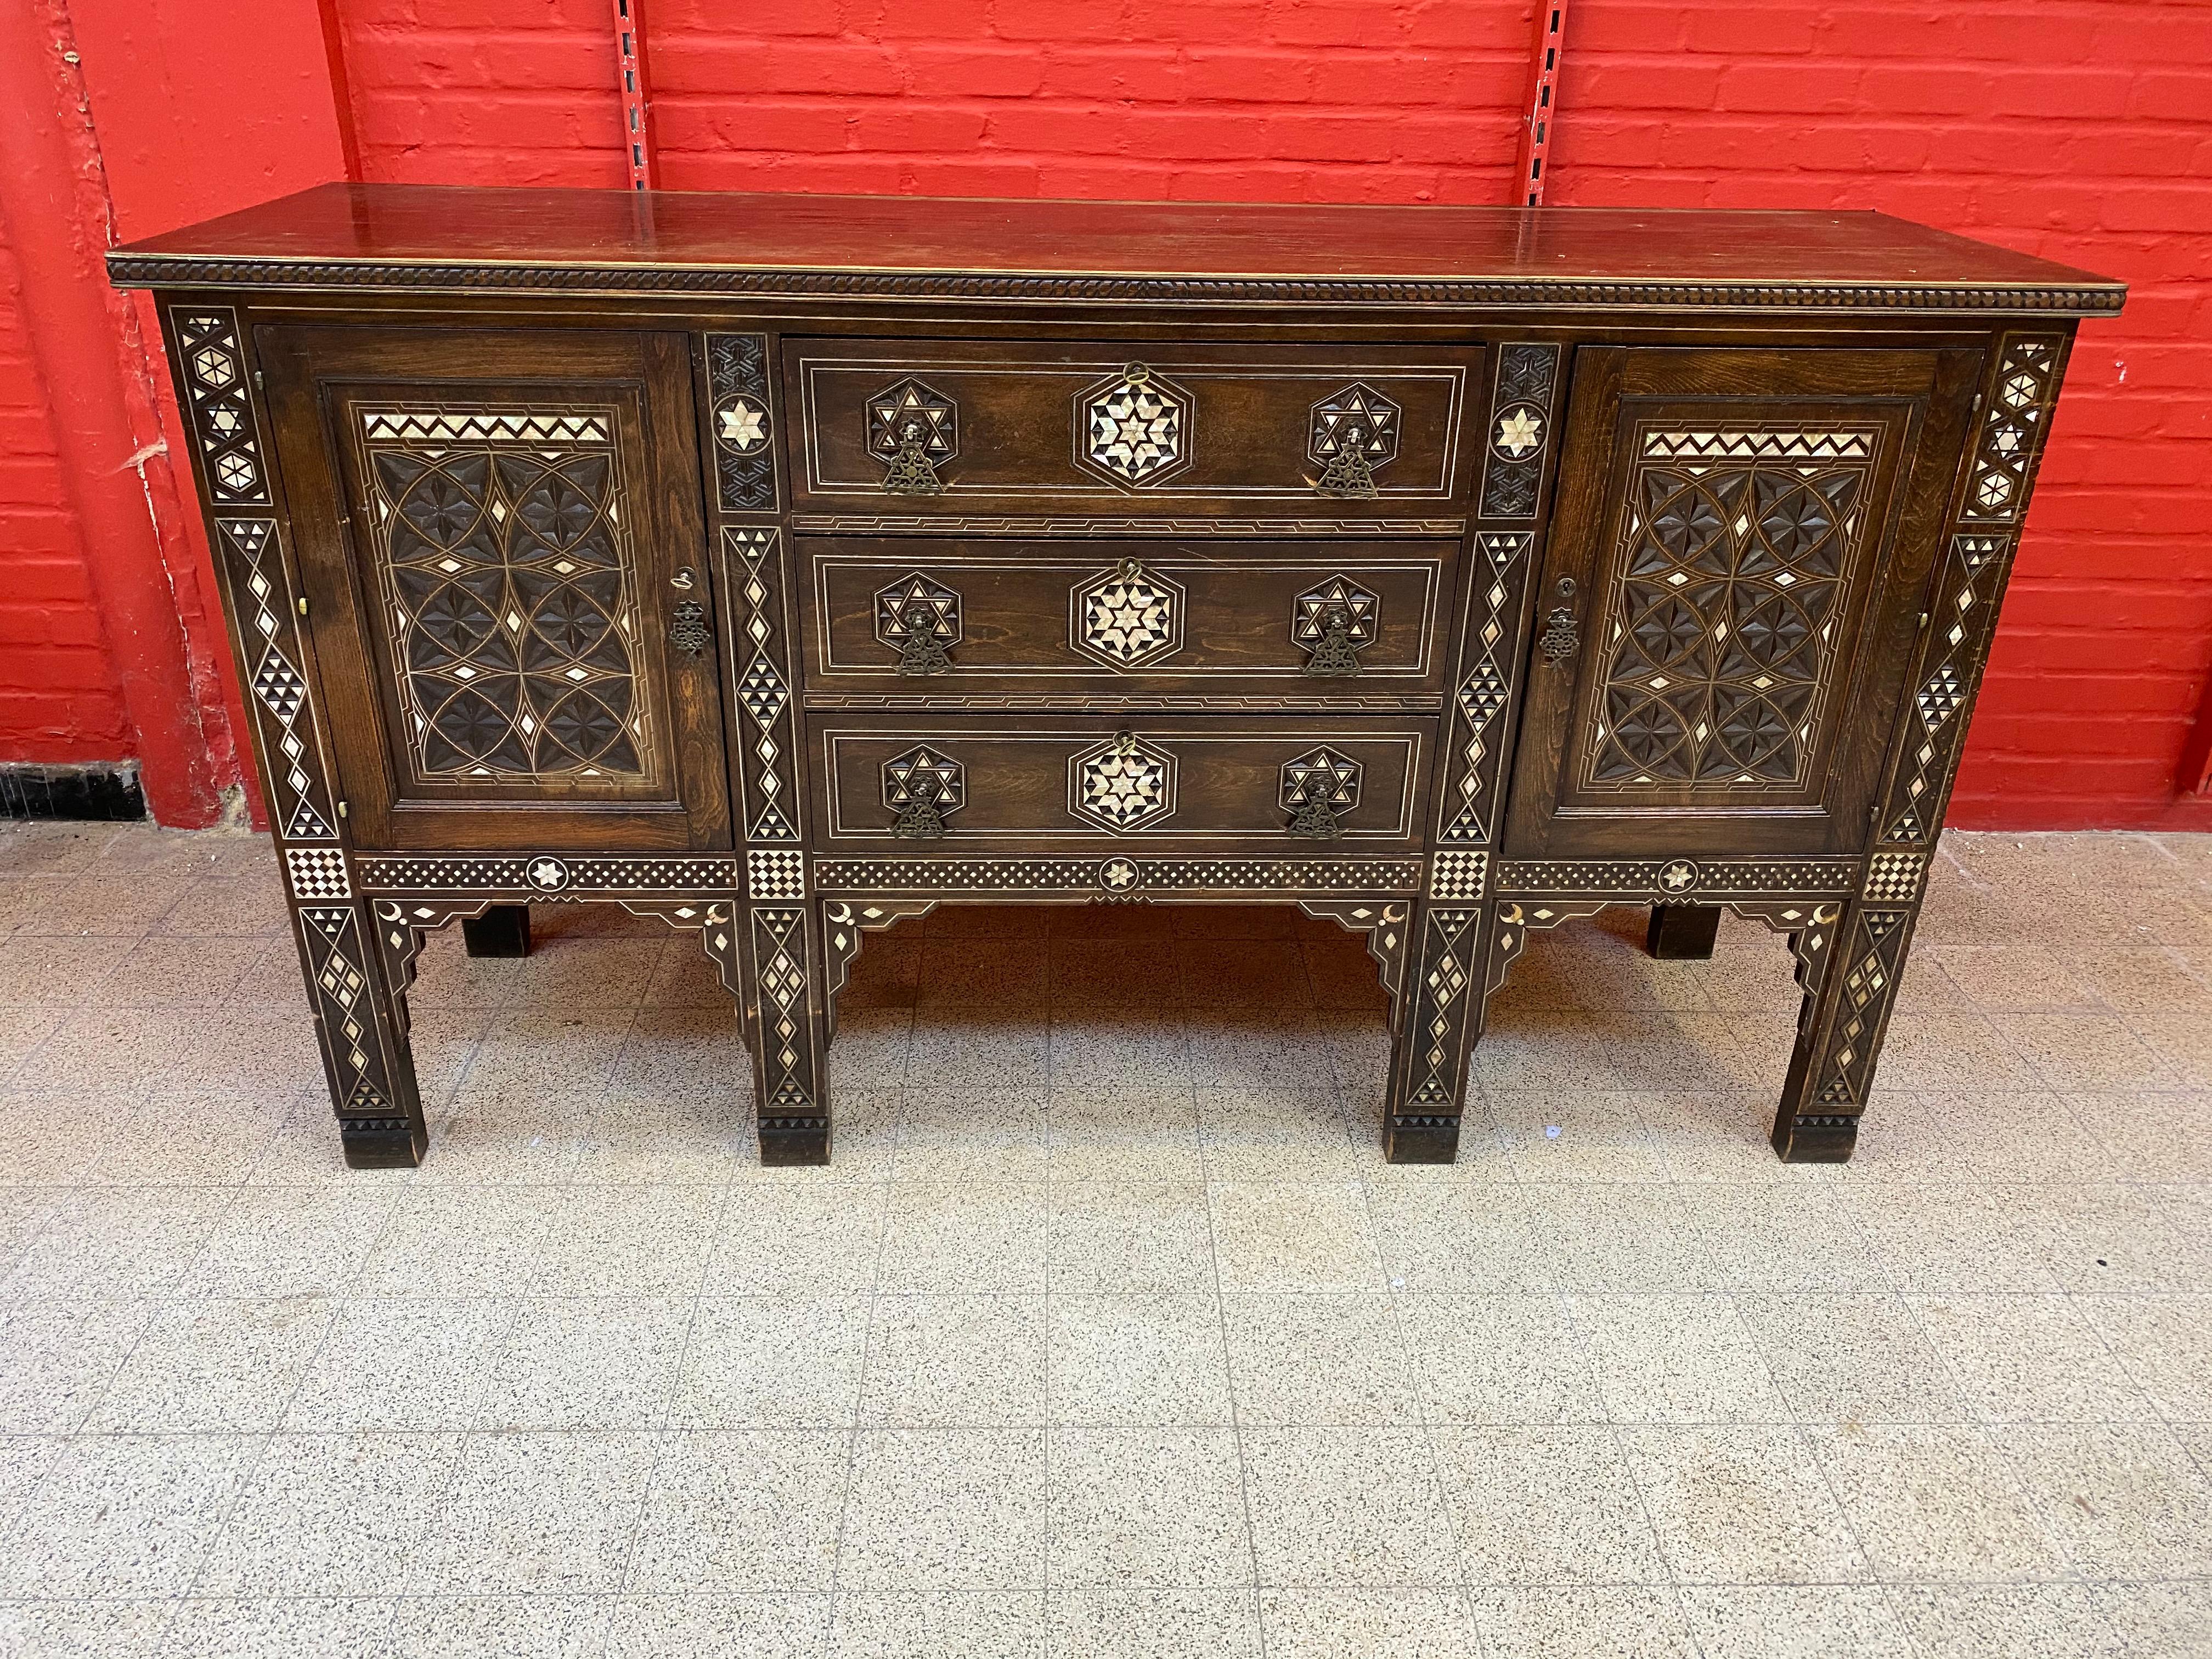 Large Oriental-Style Sideboard in carved Wood, with Mother-of-Pearl Inlay, 1880 In Good Condition For Sale In Saint-Ouen, FR